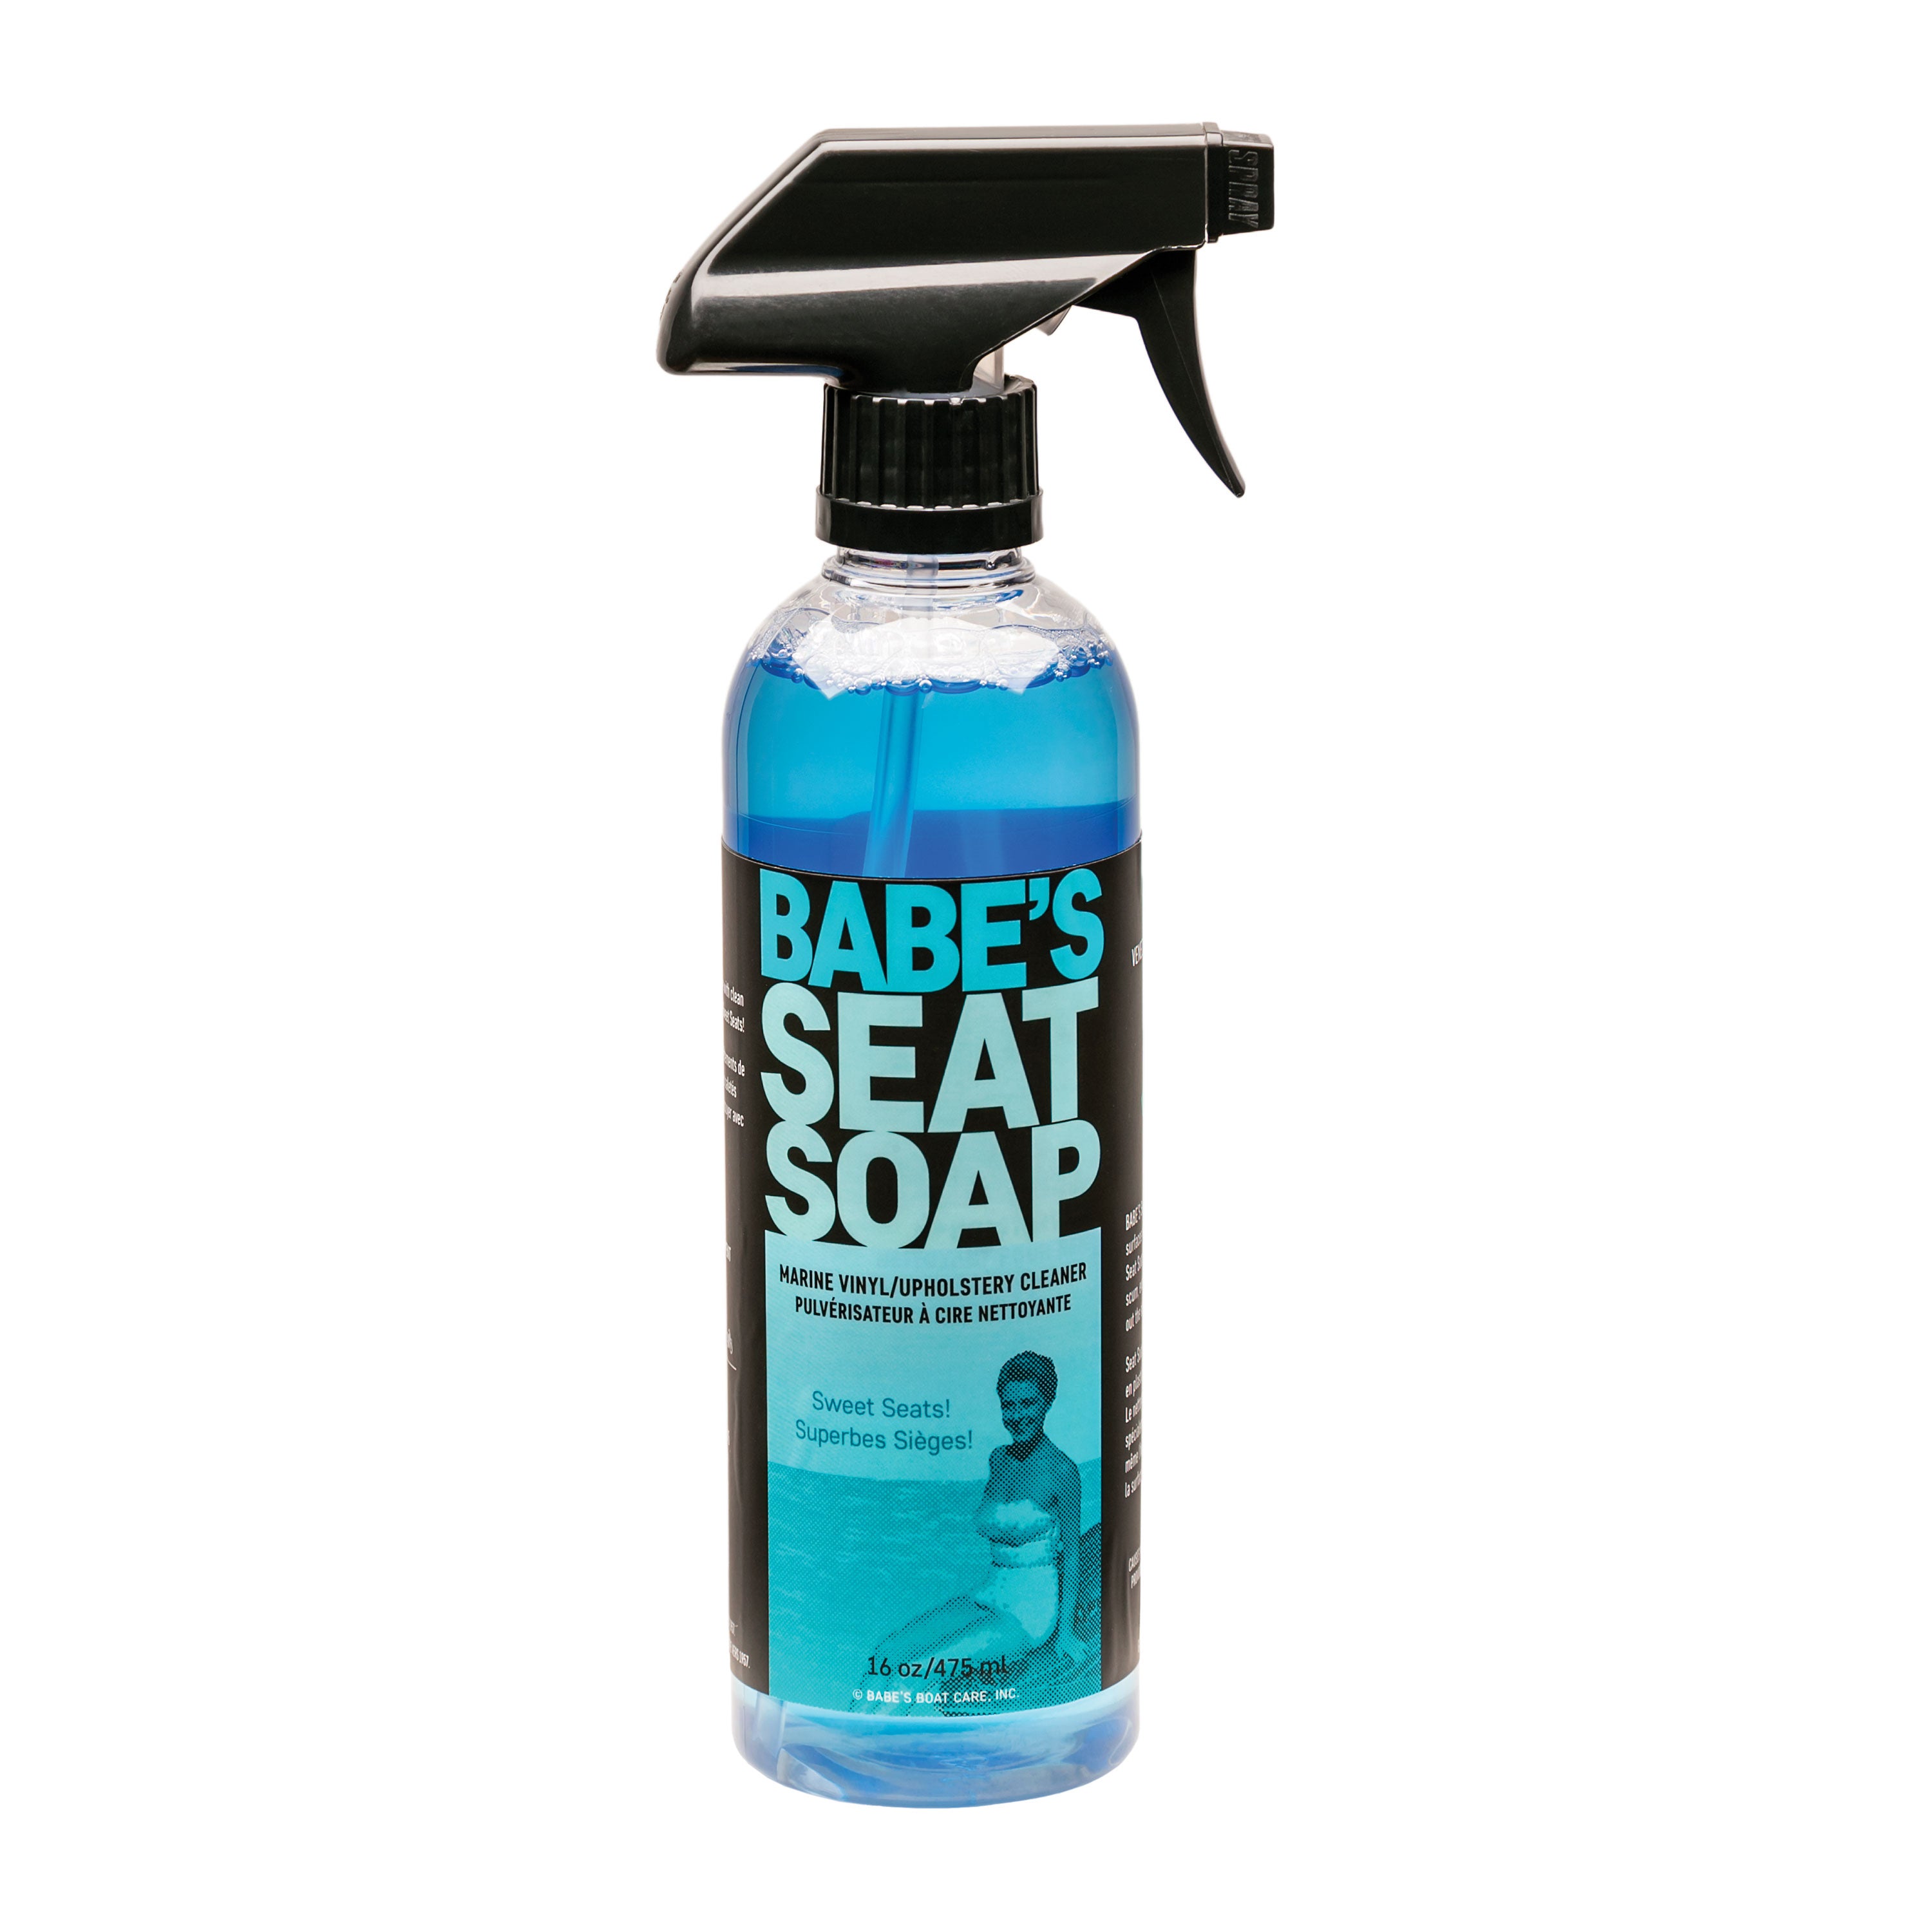 BABE'S Boat Care Products BB8016 Seat Soap - 16 oz.